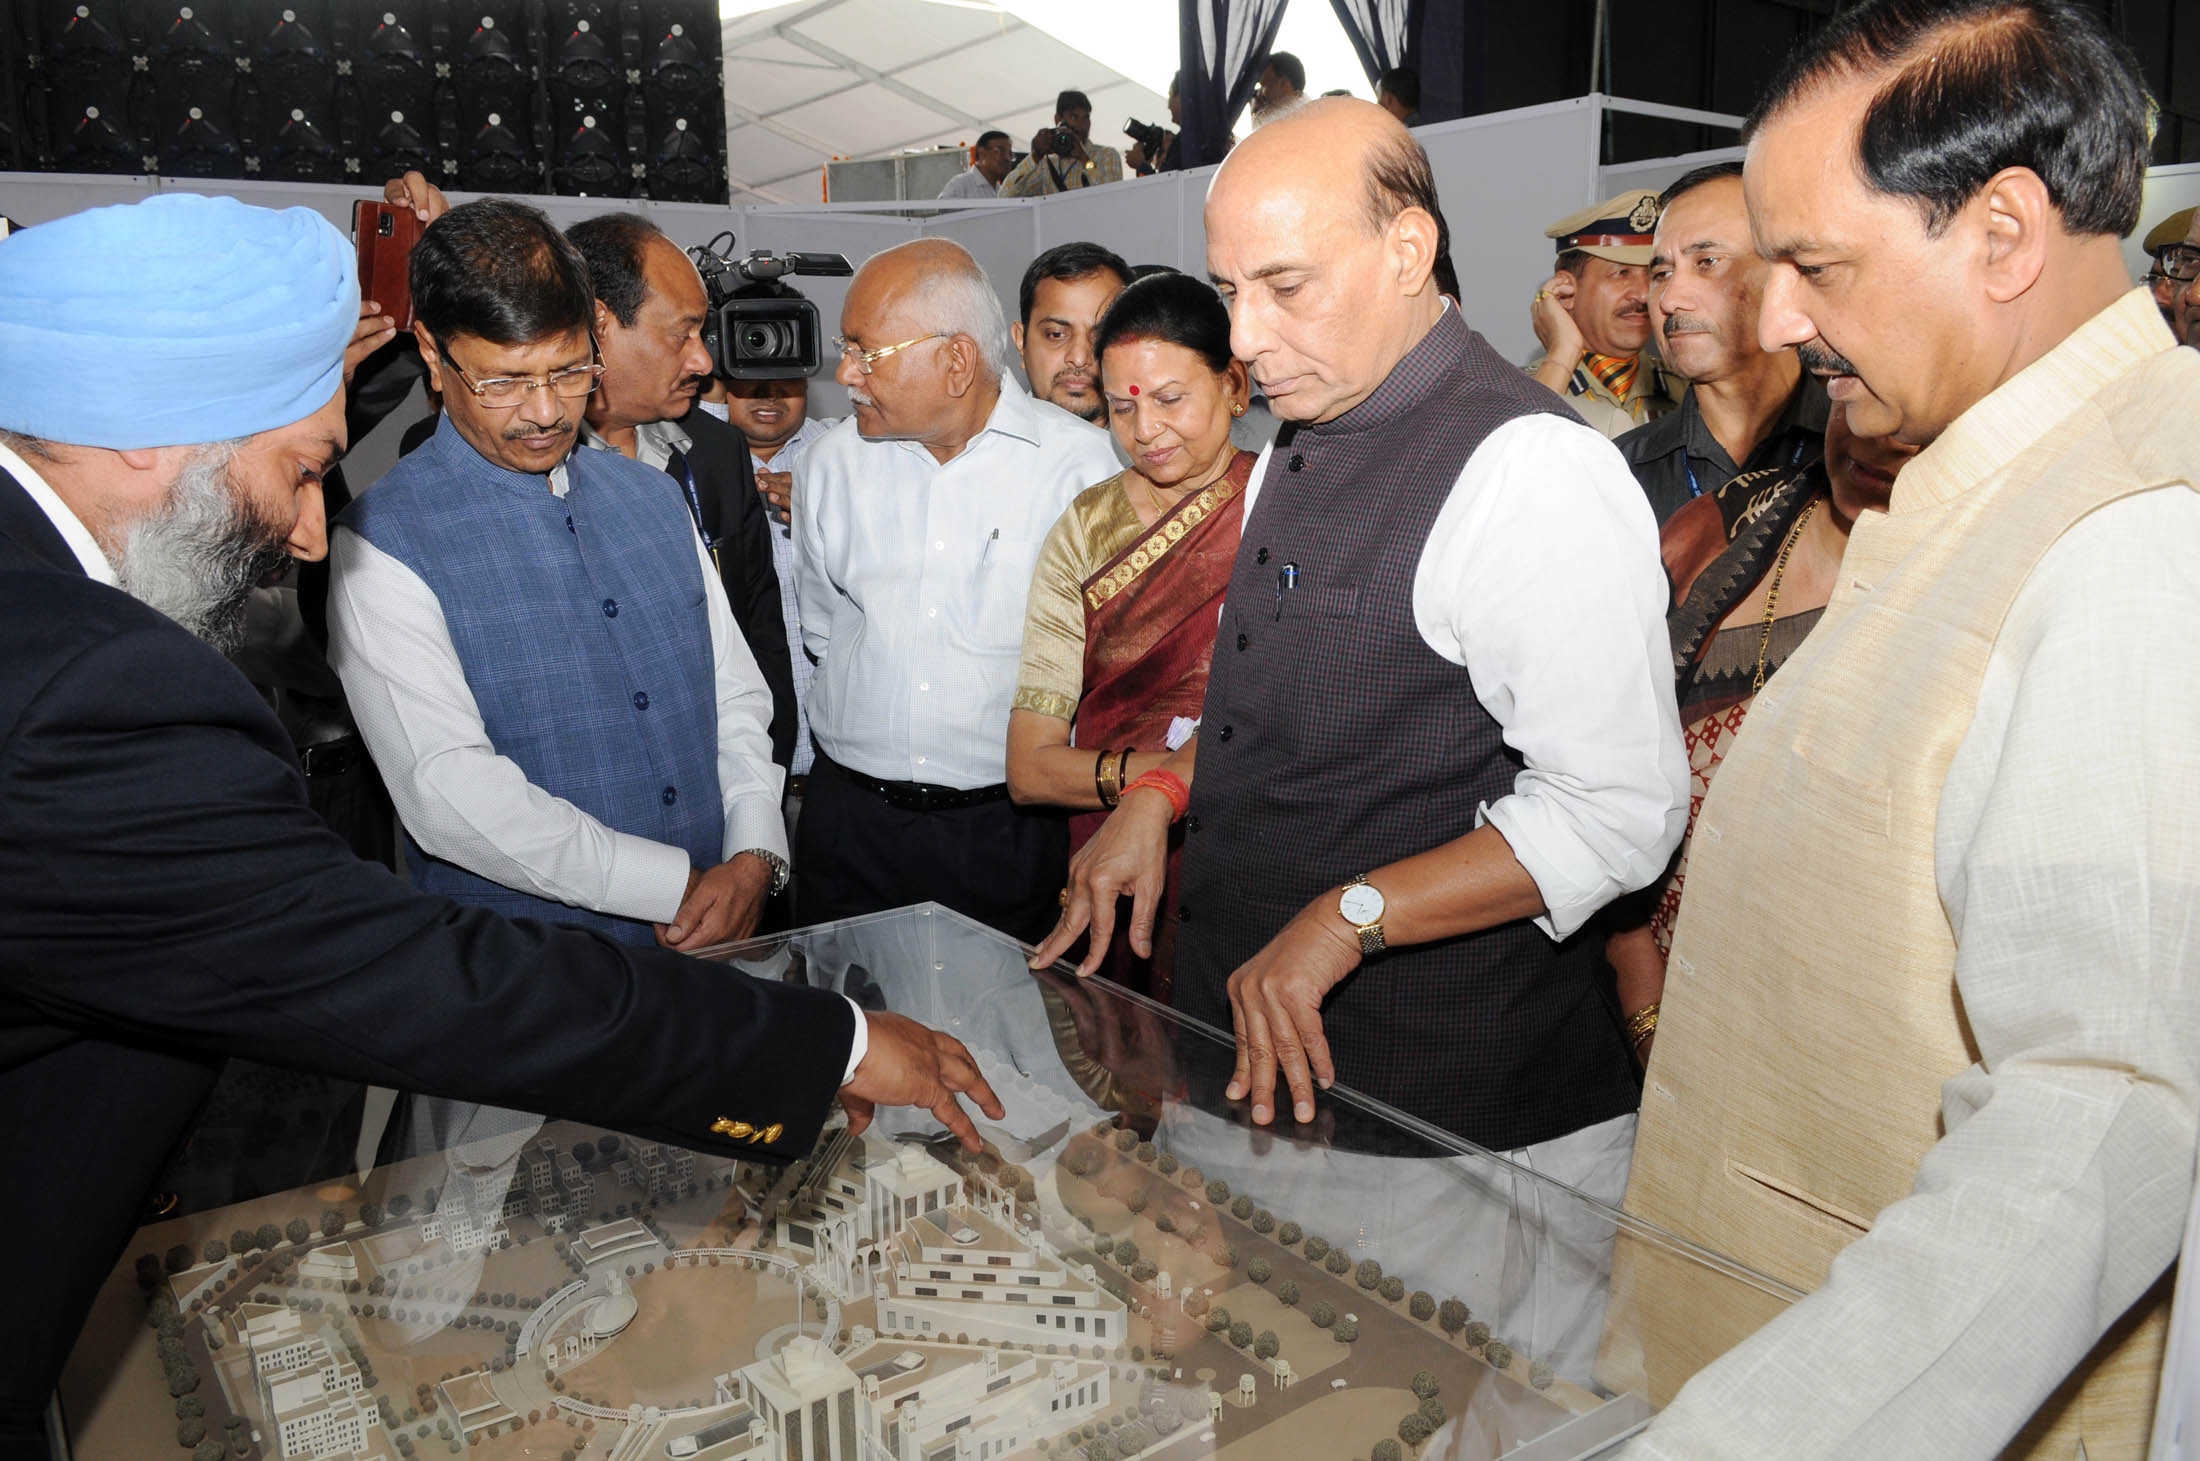 The Union Home Minister, Shri Rajnath Singh watching the model of Pt. Deen Dayal Upadhyay Institute of Archaeology, Archaeology Survey of India, in Greater Noida, Uttar Pradesh on October 28, 2016. The Minister of State for Culture and Tourism (Independent Charge), Dr. Mahesh Sharma is also seen.